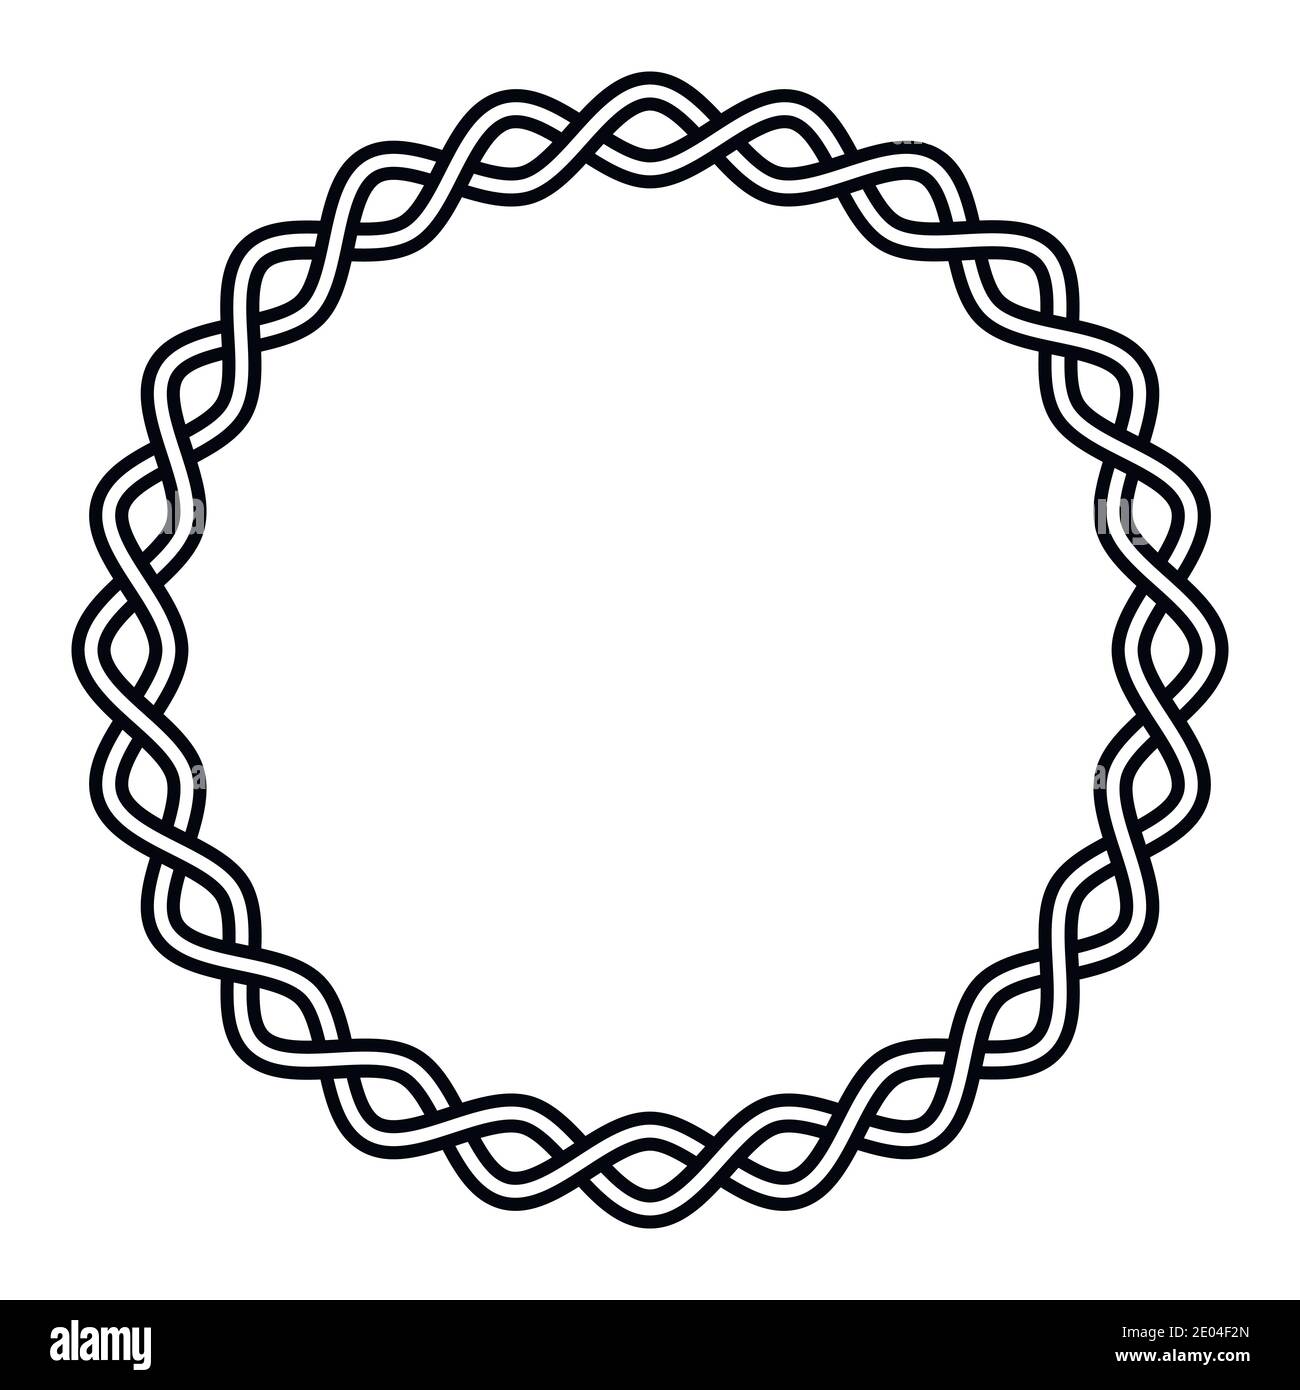 Round frame braided cable, wavy intersecting lines in circle, vector vignette pattern decoration, ornament Stock Vector